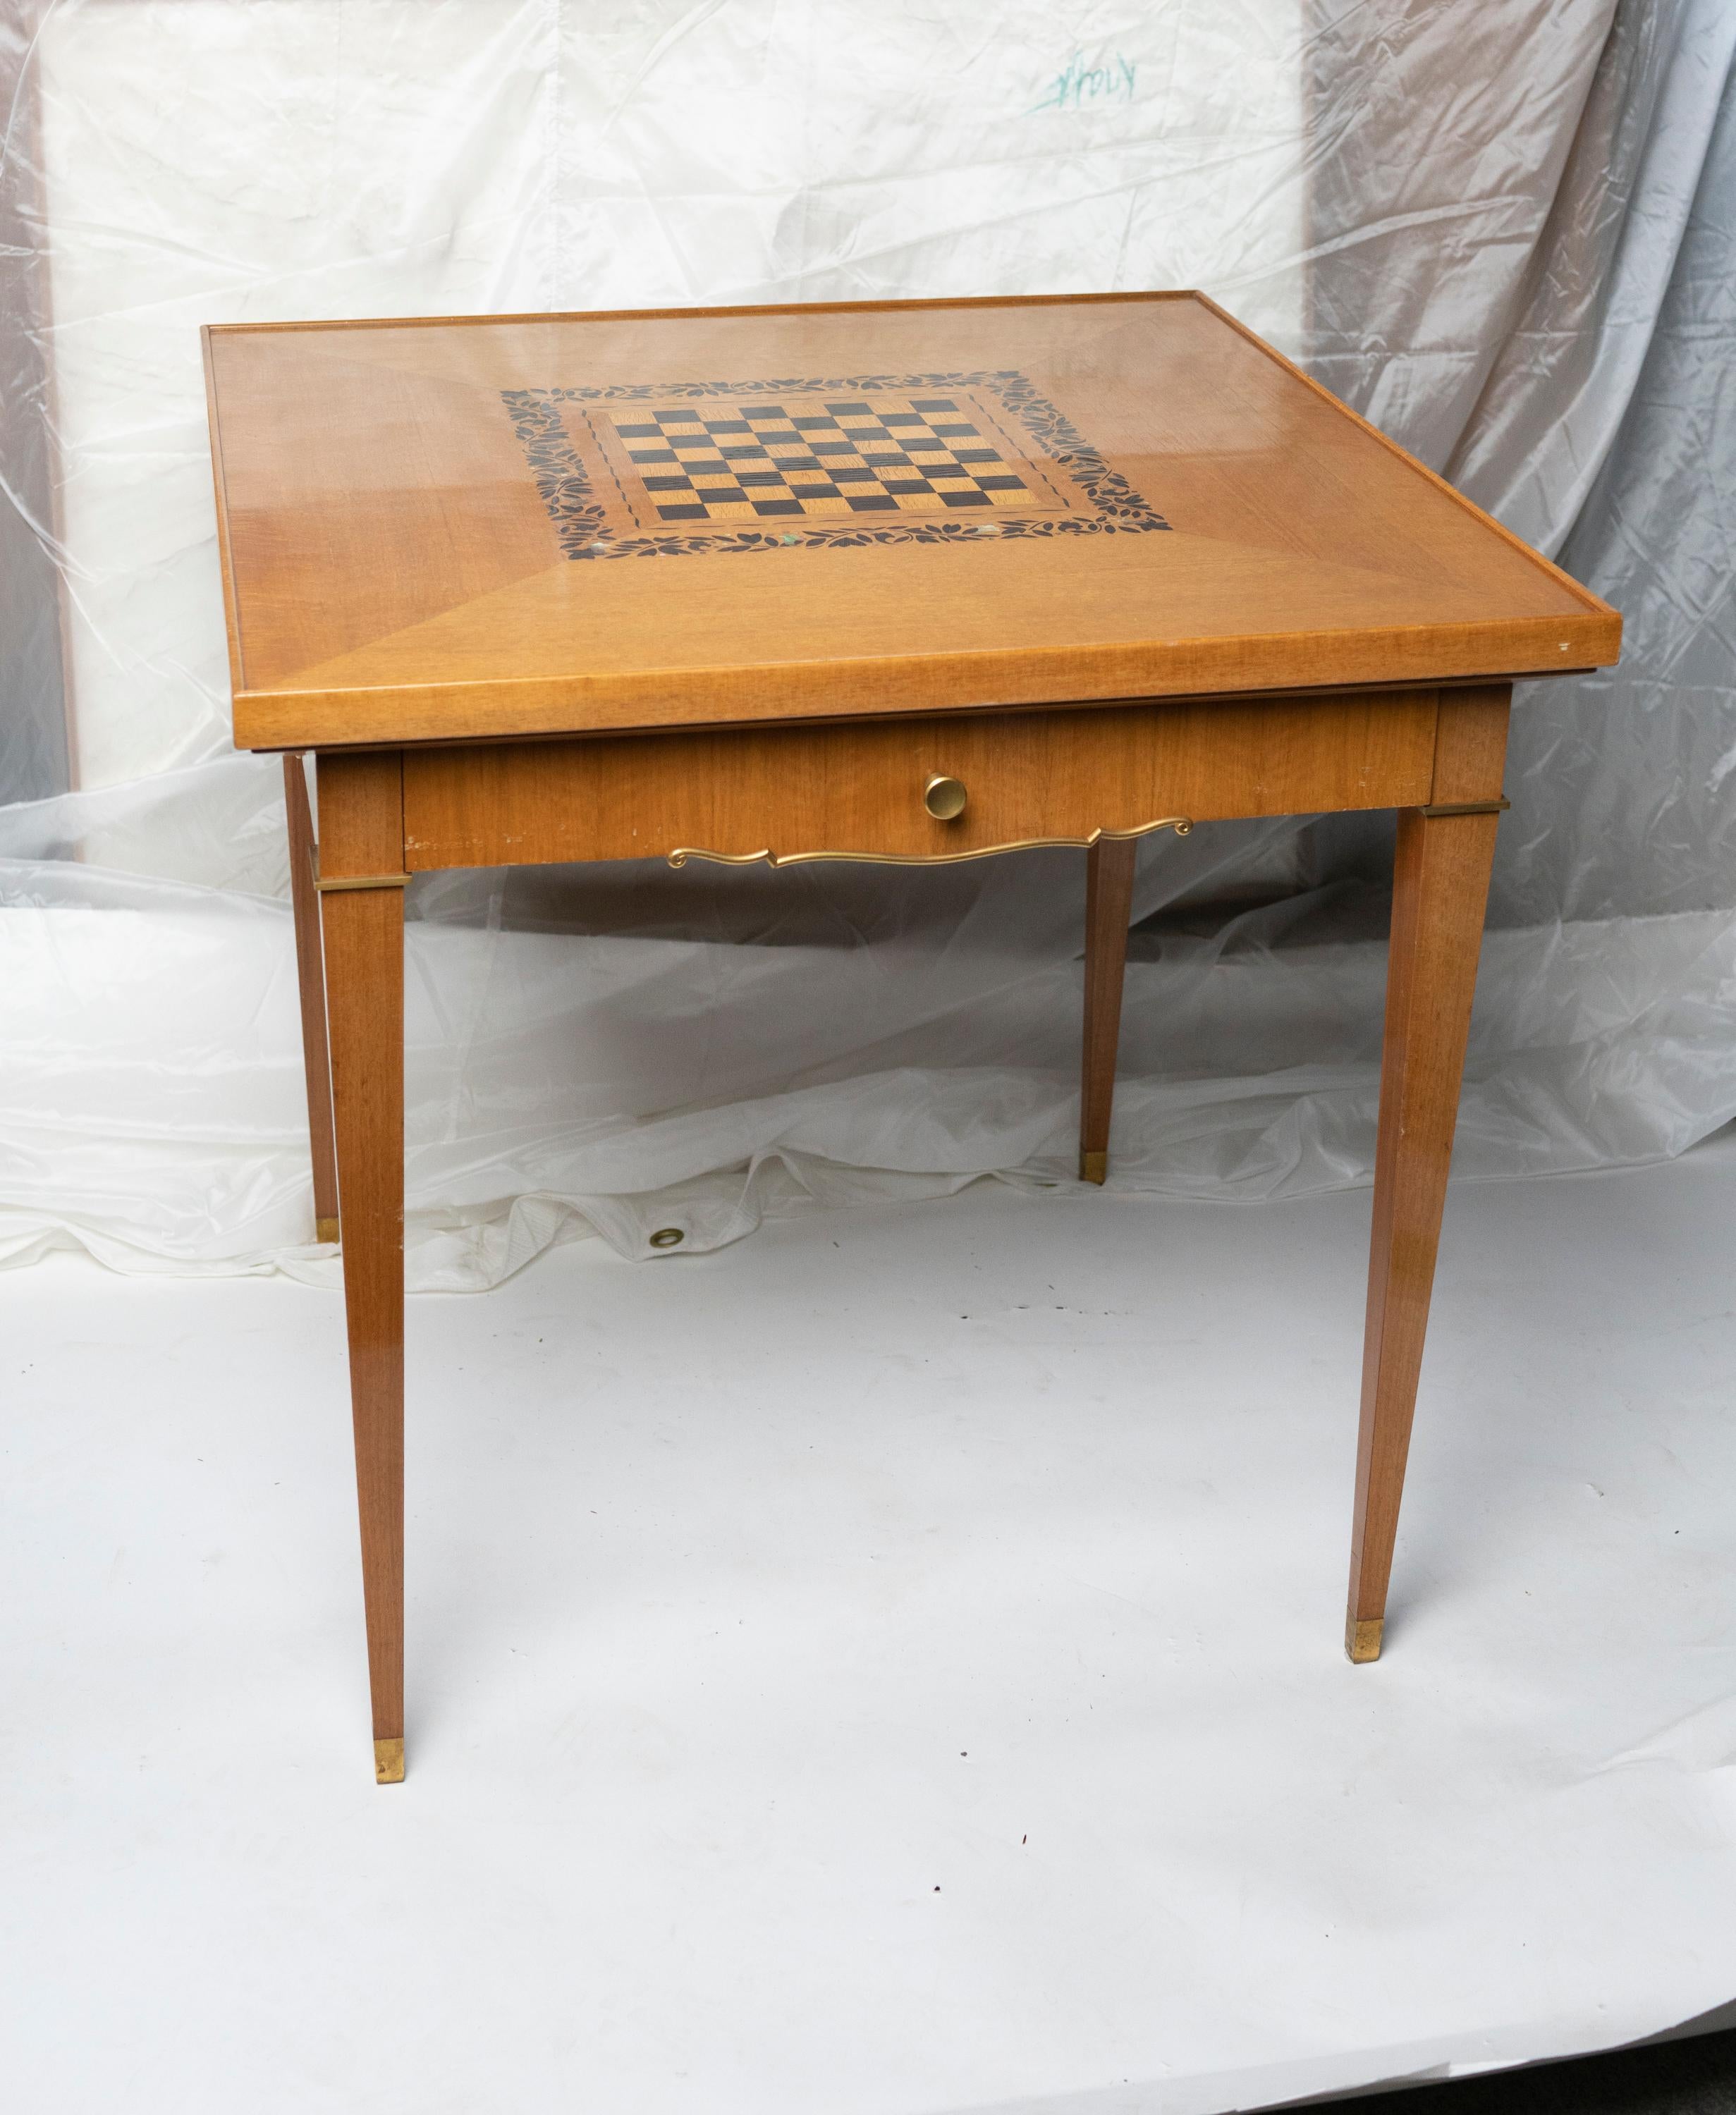 Walnut game table by Jules Leleu, with an inset chest board ebony wood and mother of pearl. The reverse side is made in tooled black and silver leather resting on gilded brass feet signed: Bearing sticker: 